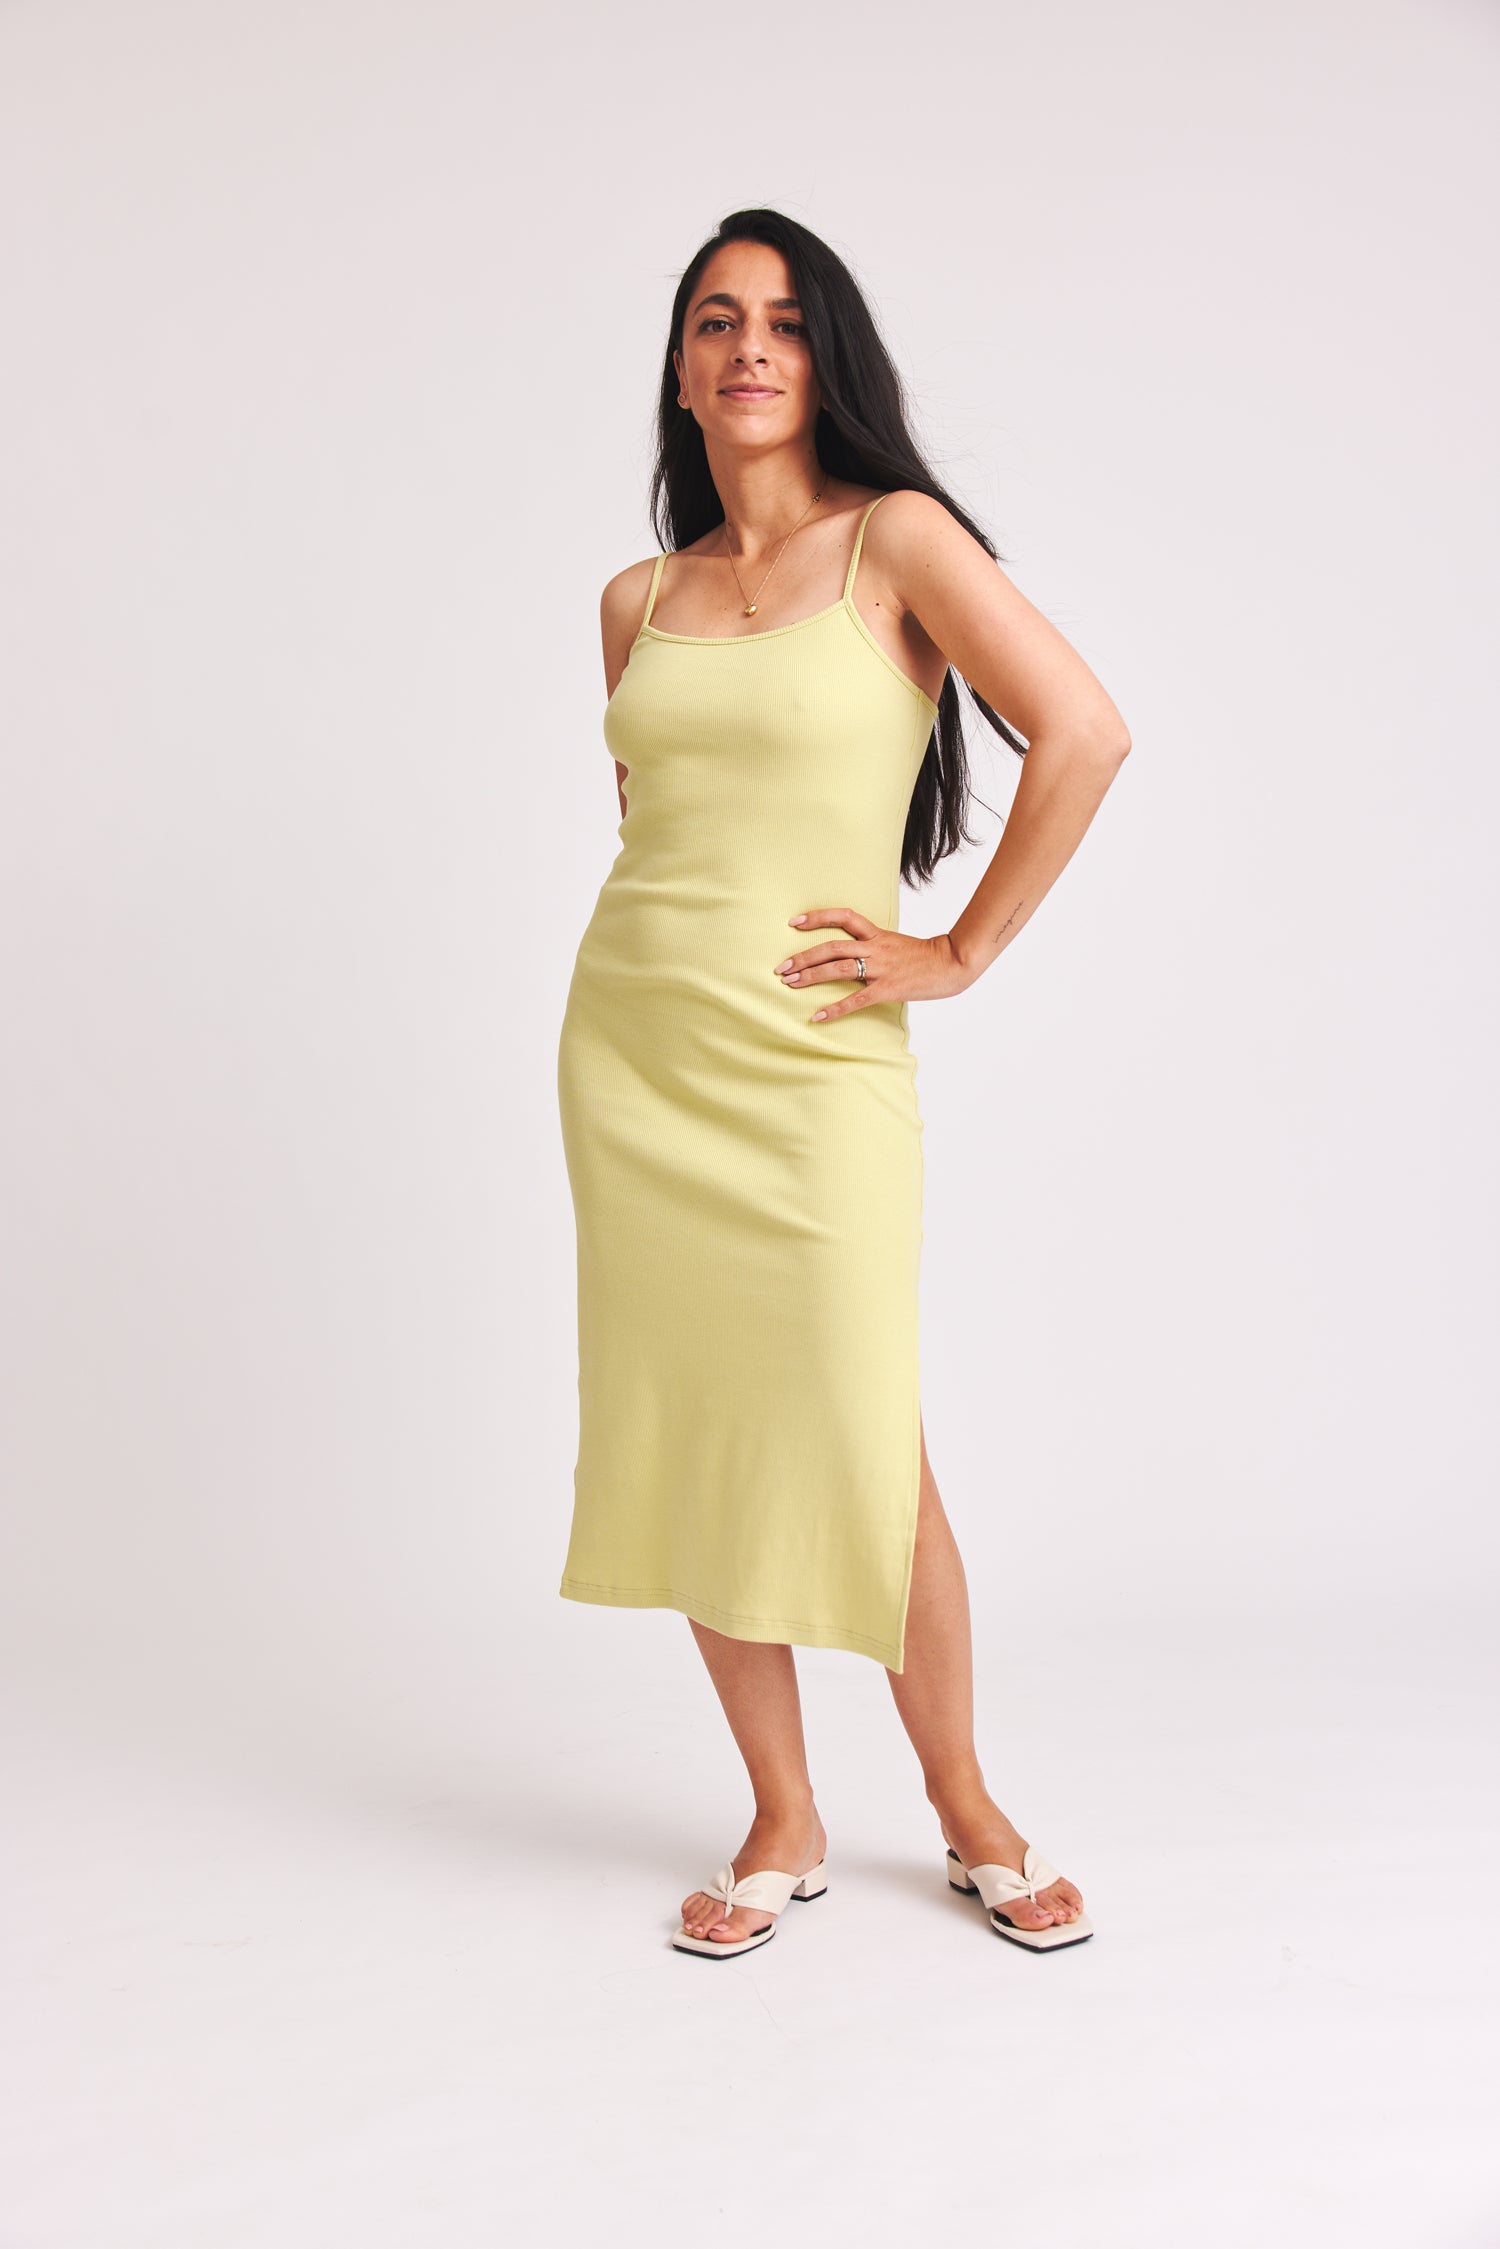 Yellow Bonnie dress made of organic cotton by Baige the Label